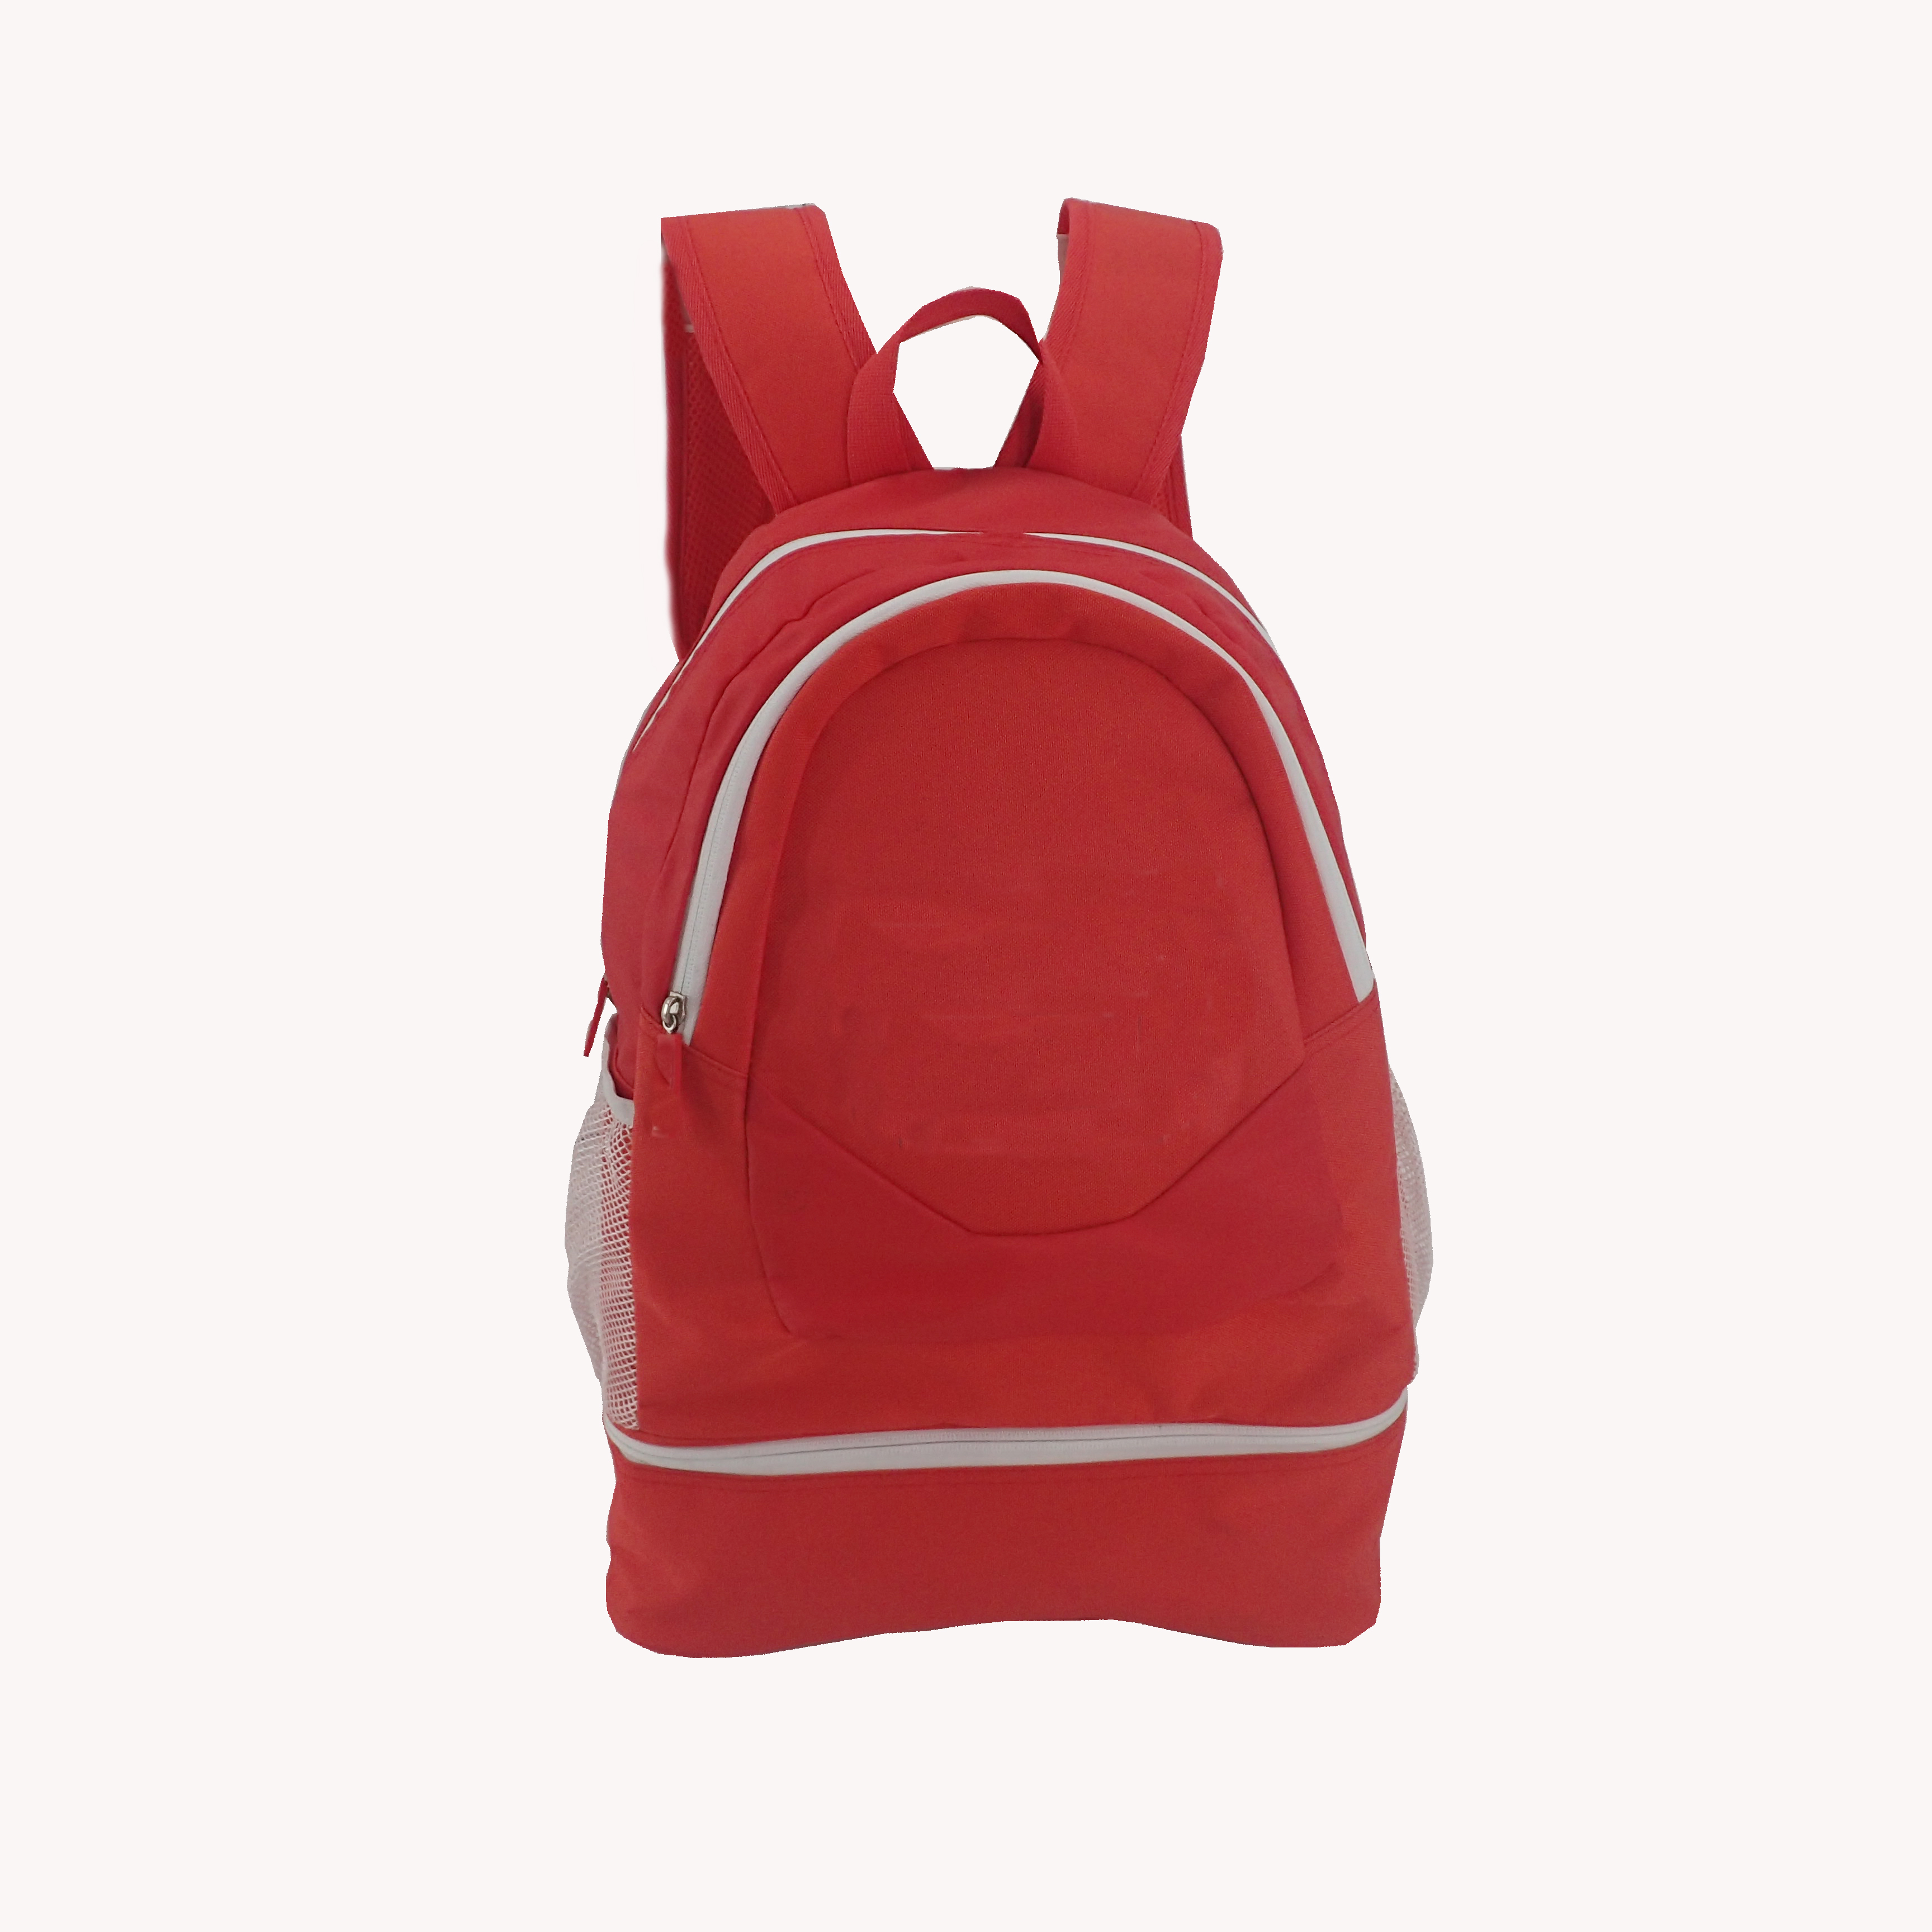 two compartment backpack